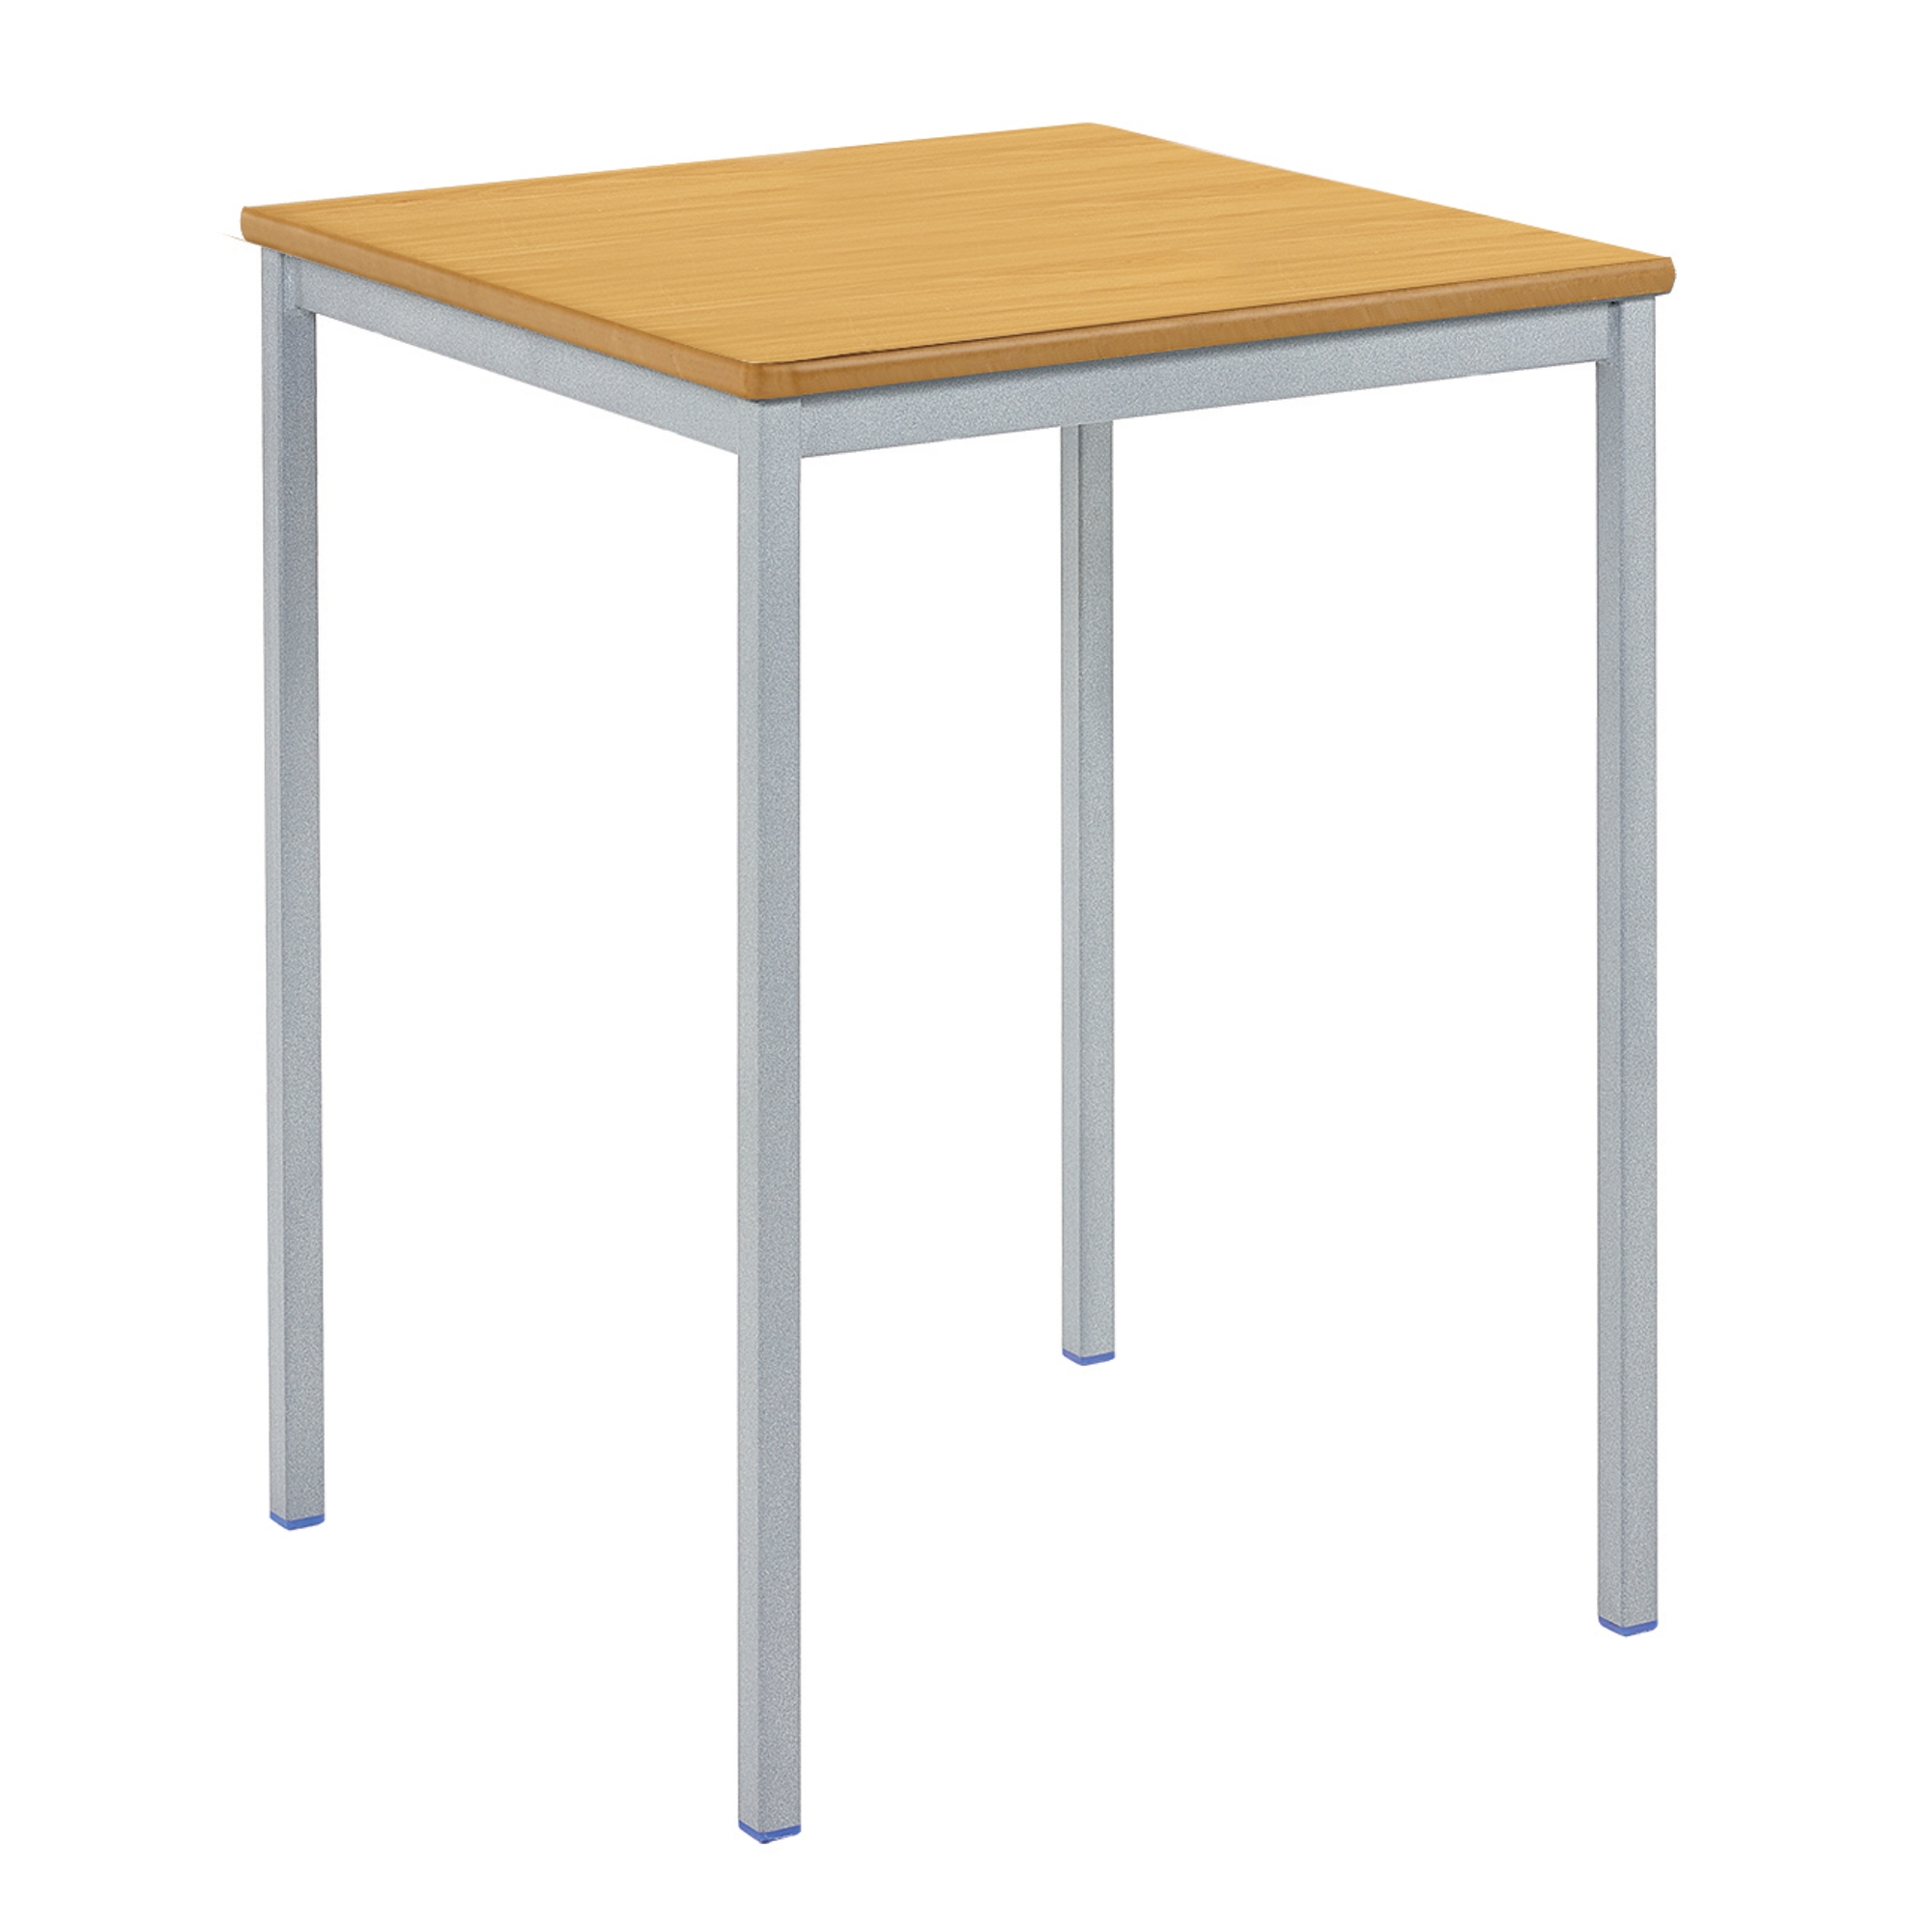 Classmates Square Fully Welded Classroom Table - 600 x 600 x 460mm - Beech